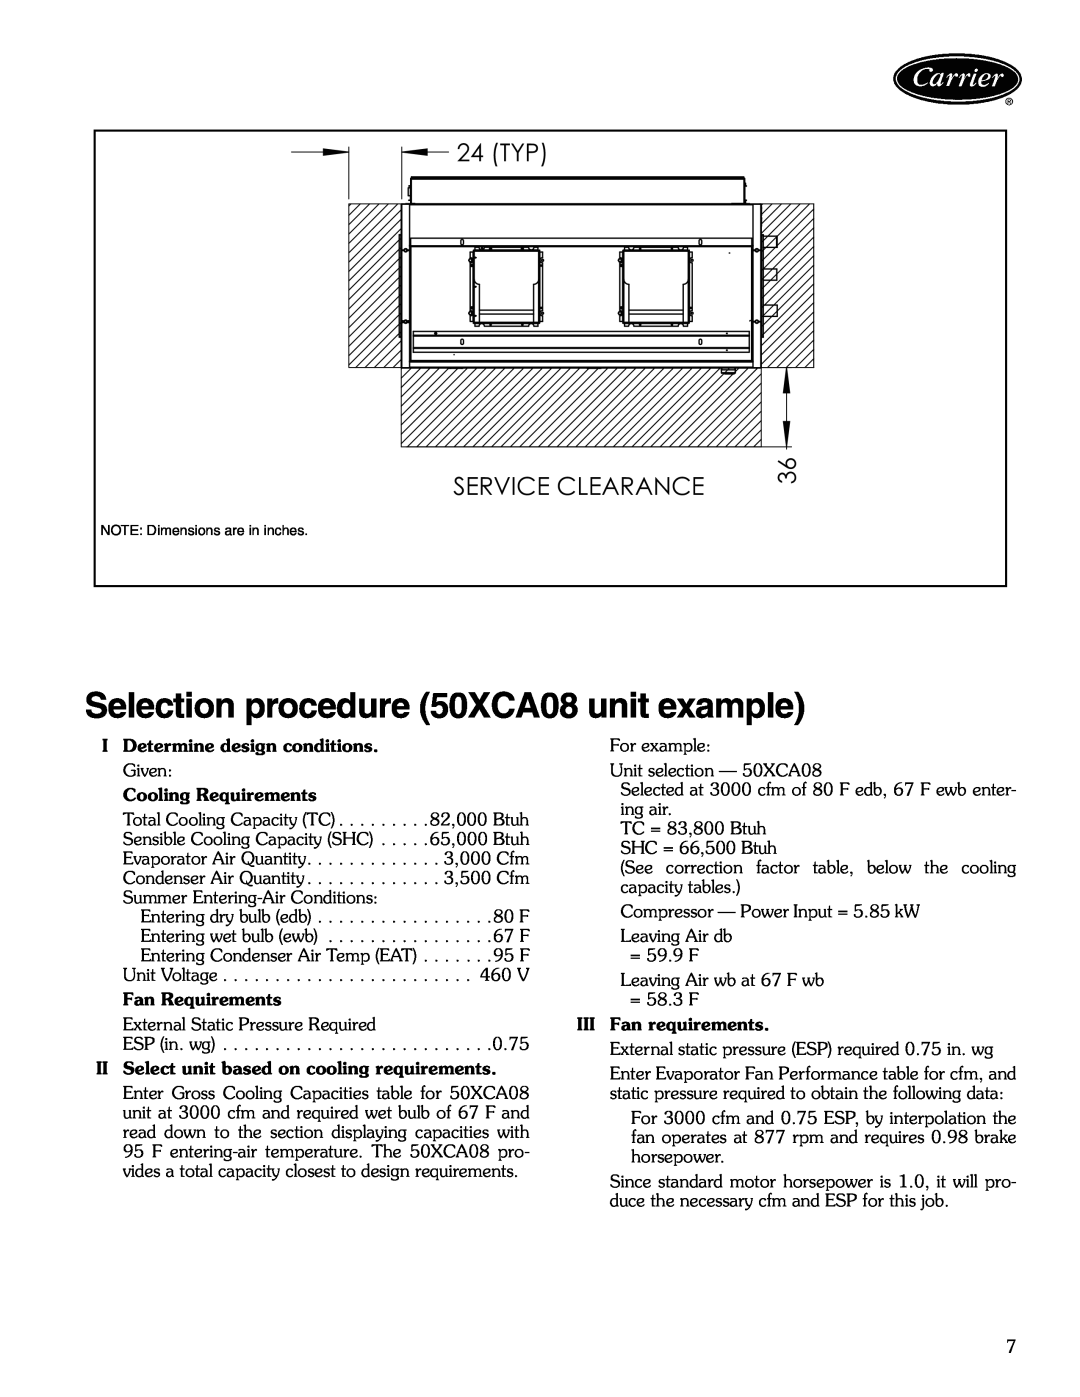 Carrier 50XCA06-24 manual Selection procedure 50XCA08 unit example, 24 TYP, Service Clearance, a50-8502 